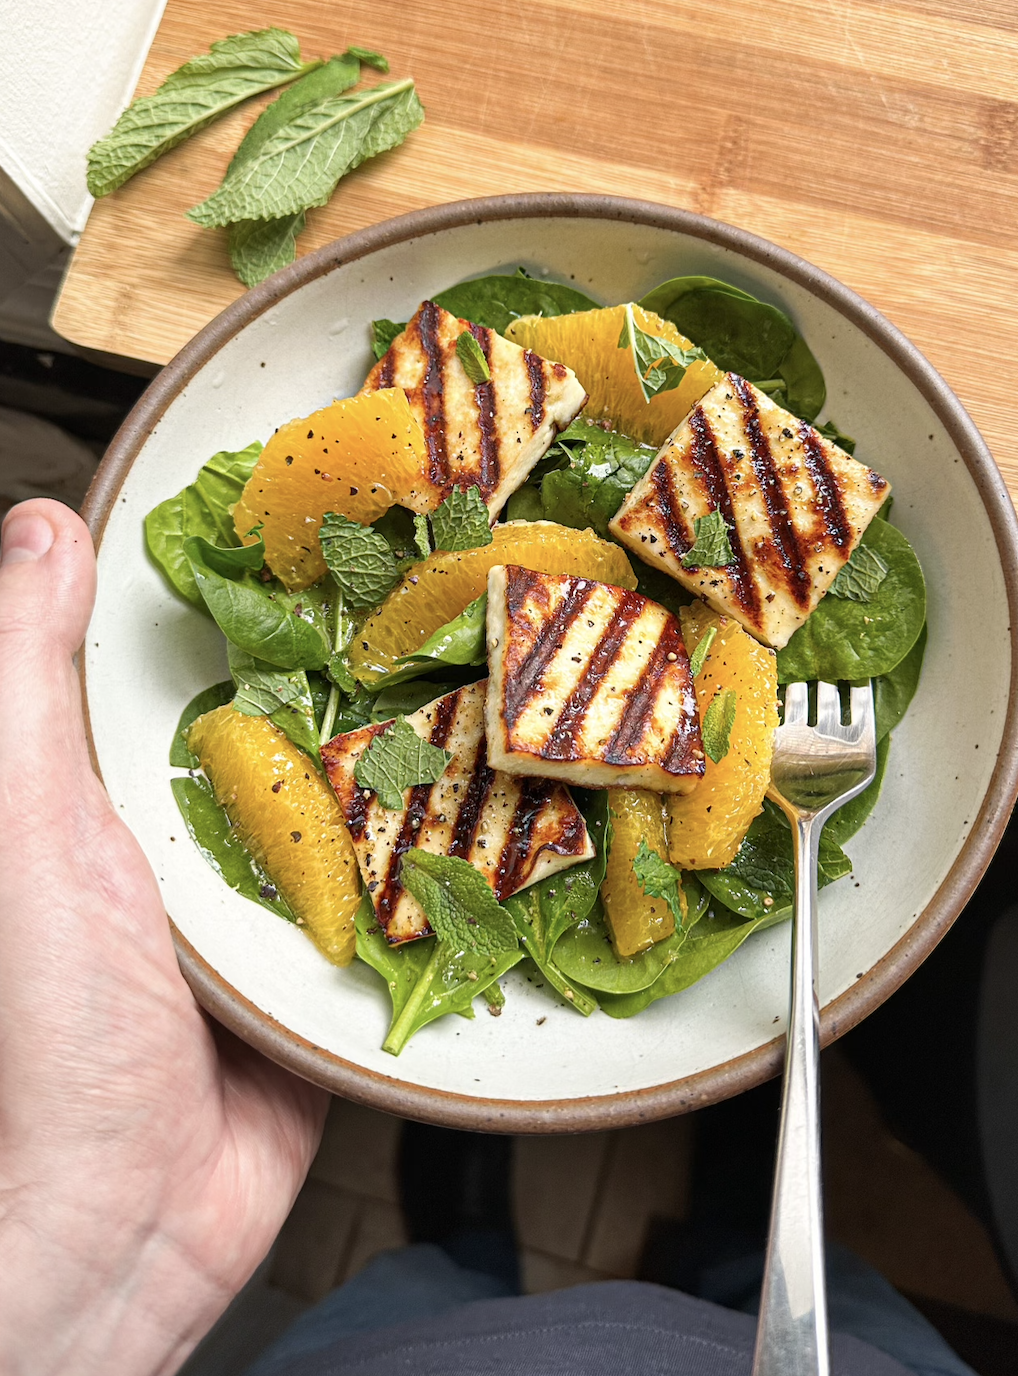 Grilled halloumi cheese with orange and spinach salad